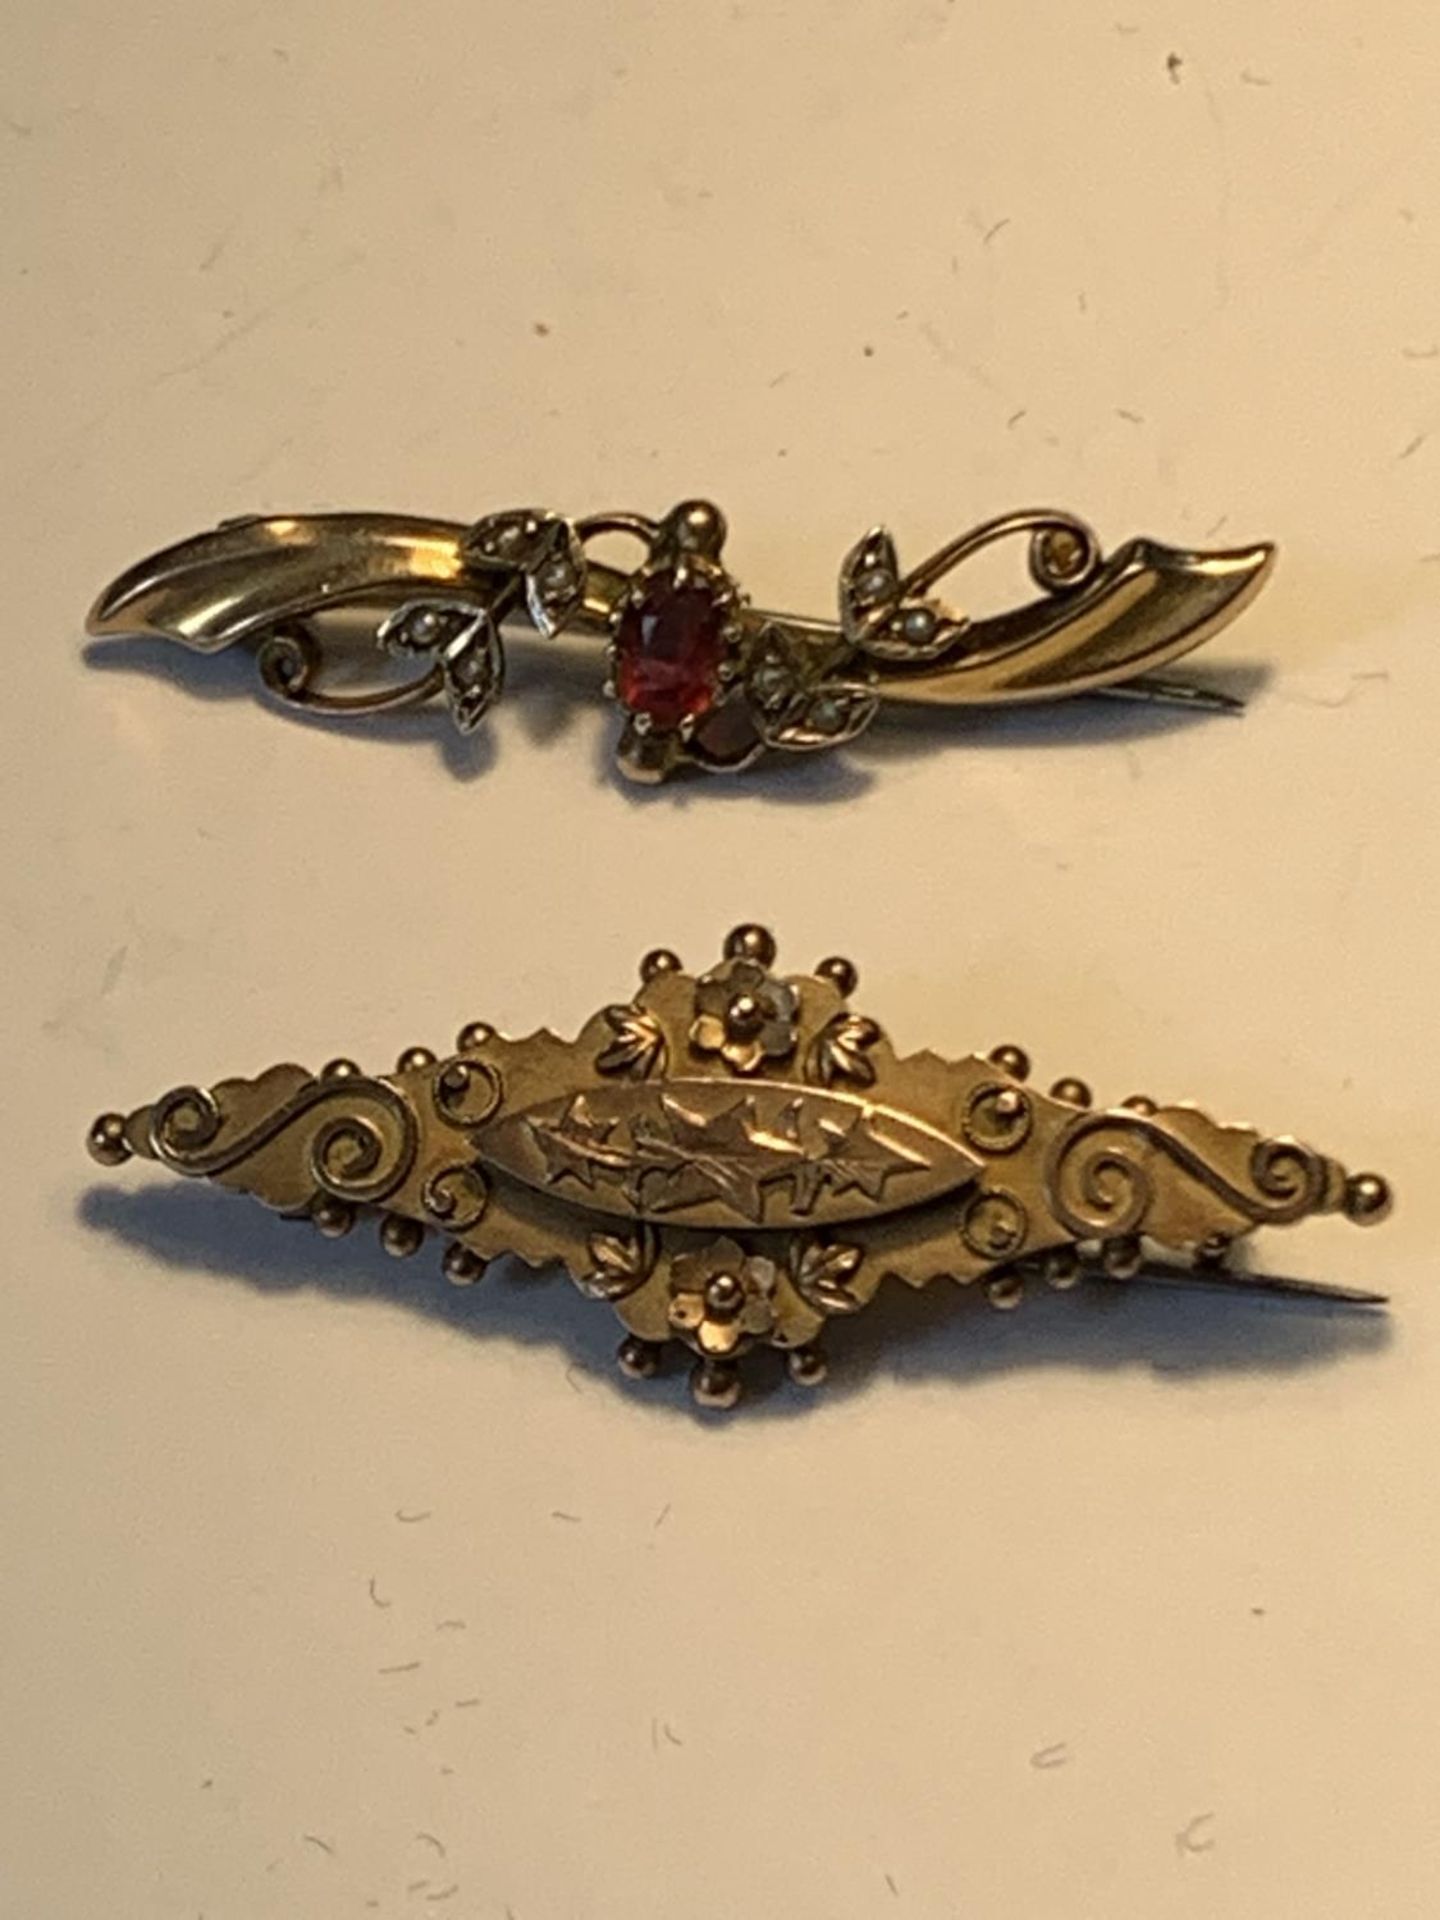 TWO 9 CARAT GOLD BROOCHES ONE WITH A RED STONE AND SEED PEARLS GROSS WEIGHT 5.05 GRAMS